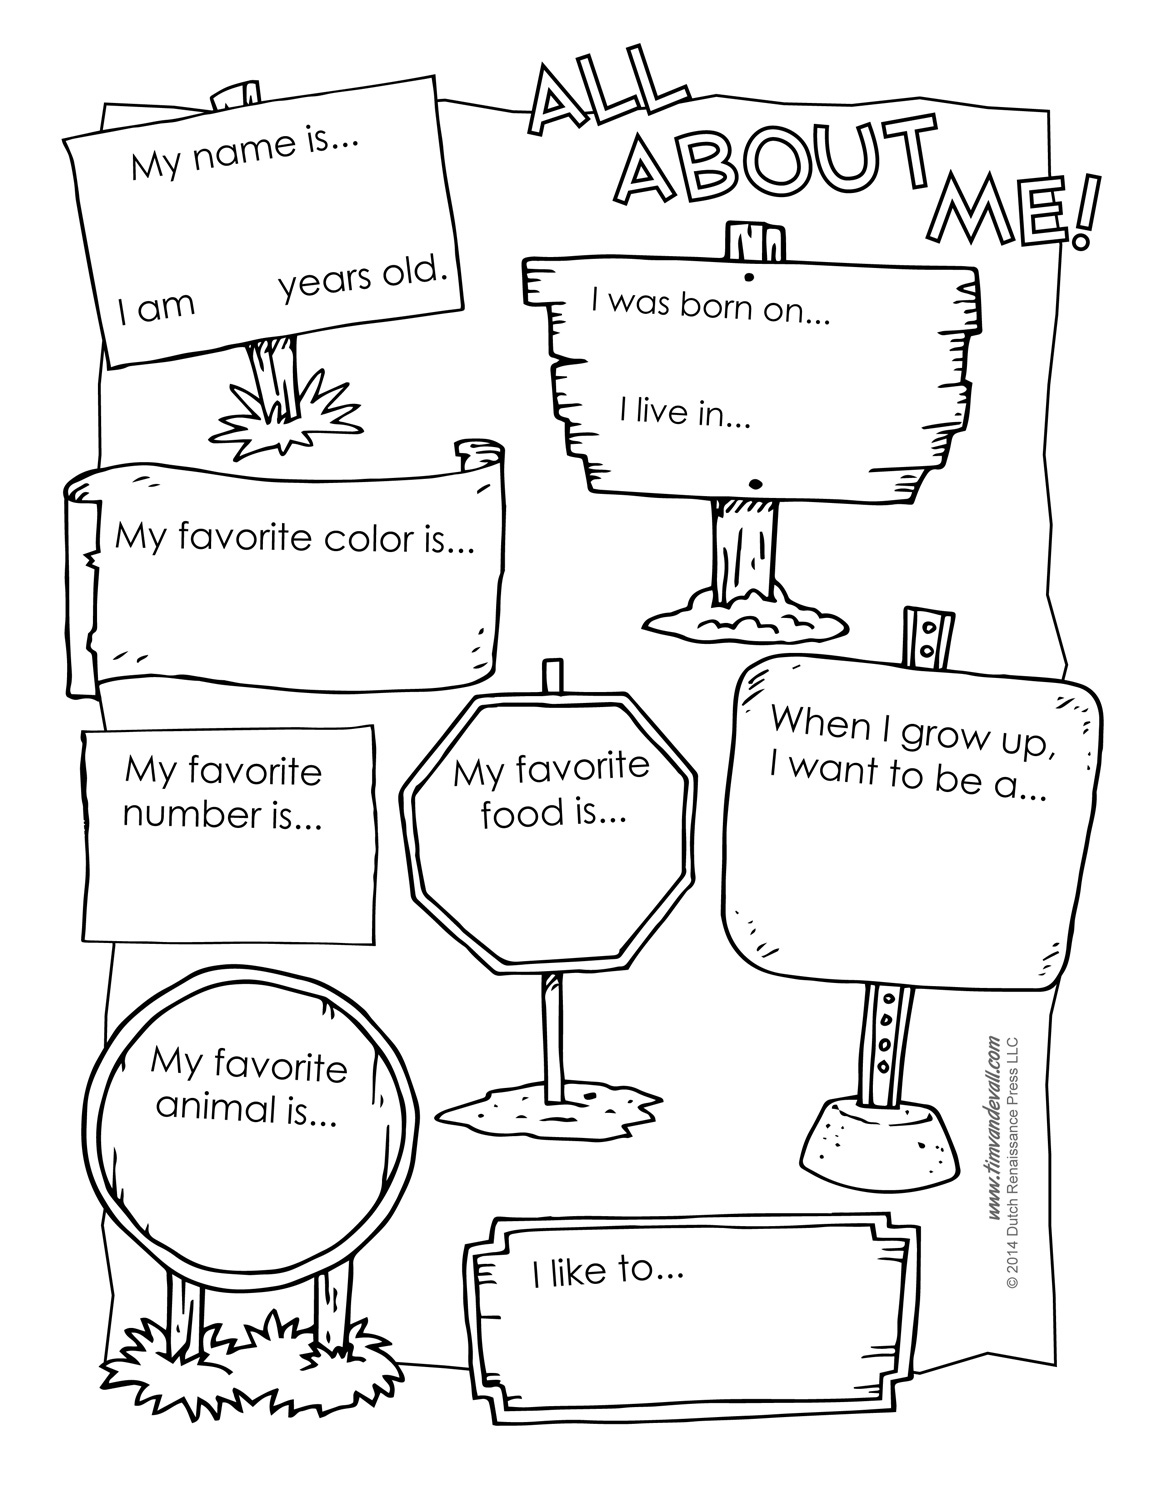 All About Me Booklet Free Printable Pdf